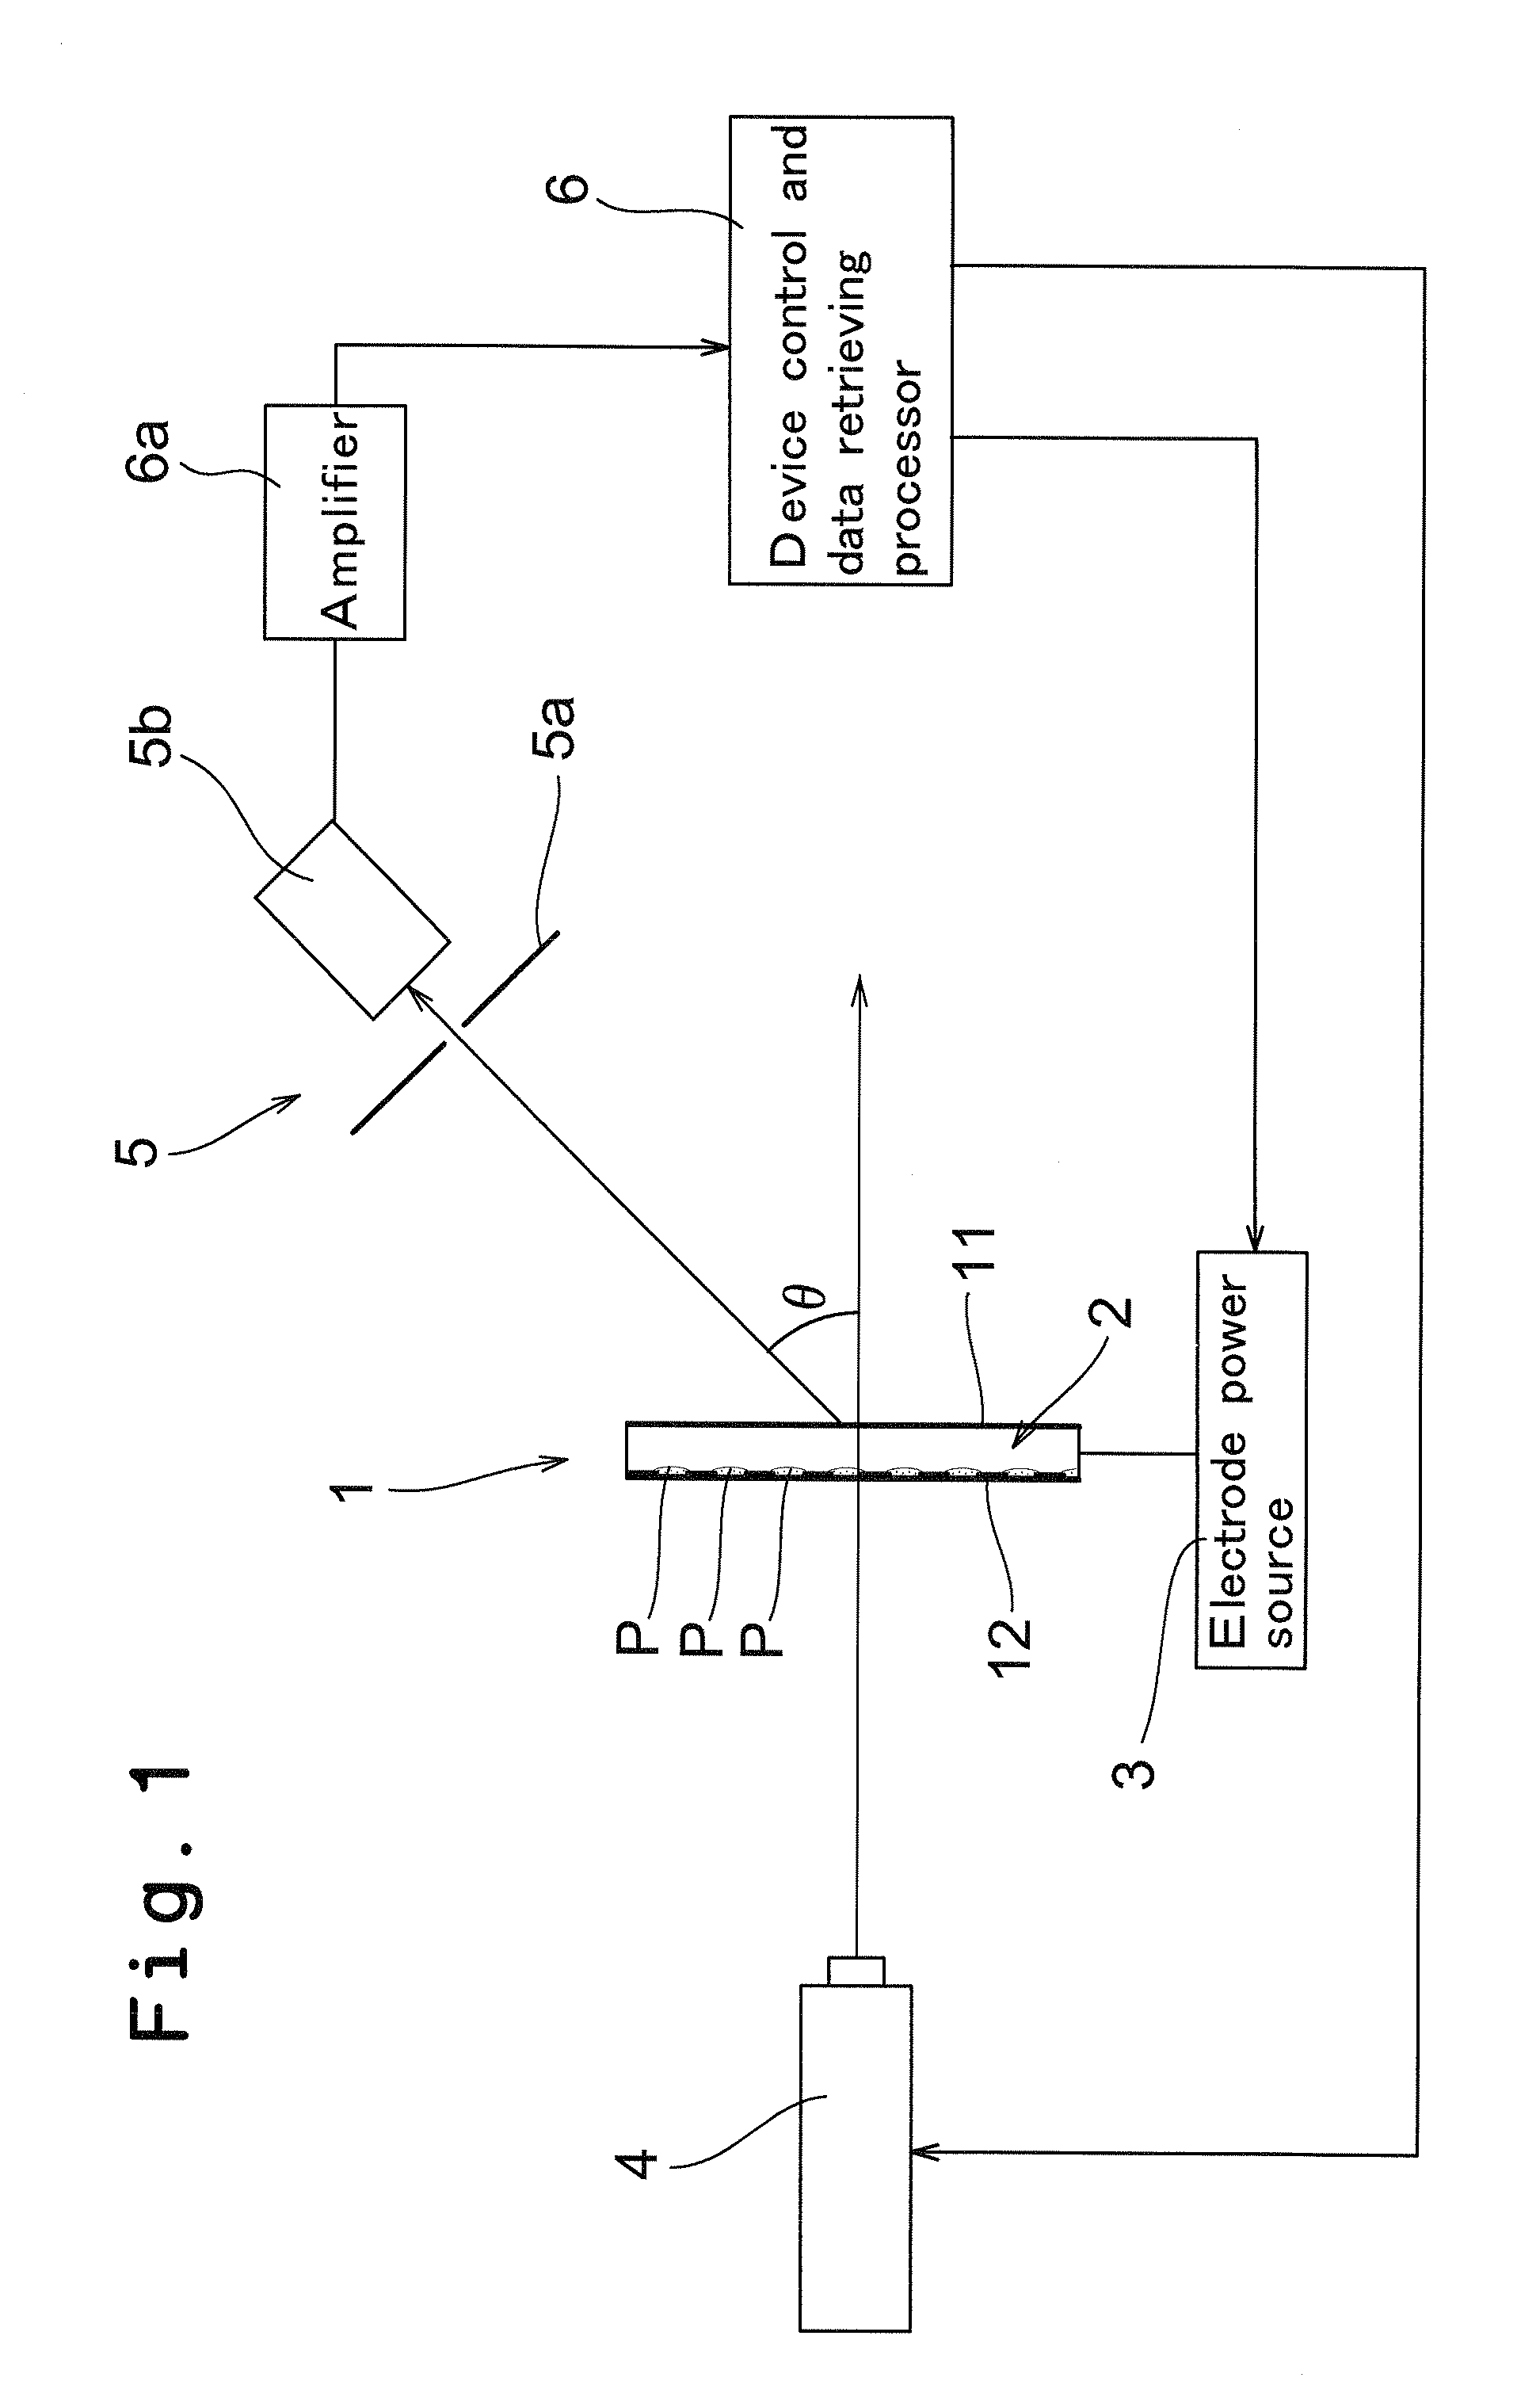 Method and apparatus for evaluating dielectrophoretic intensity of microparticle